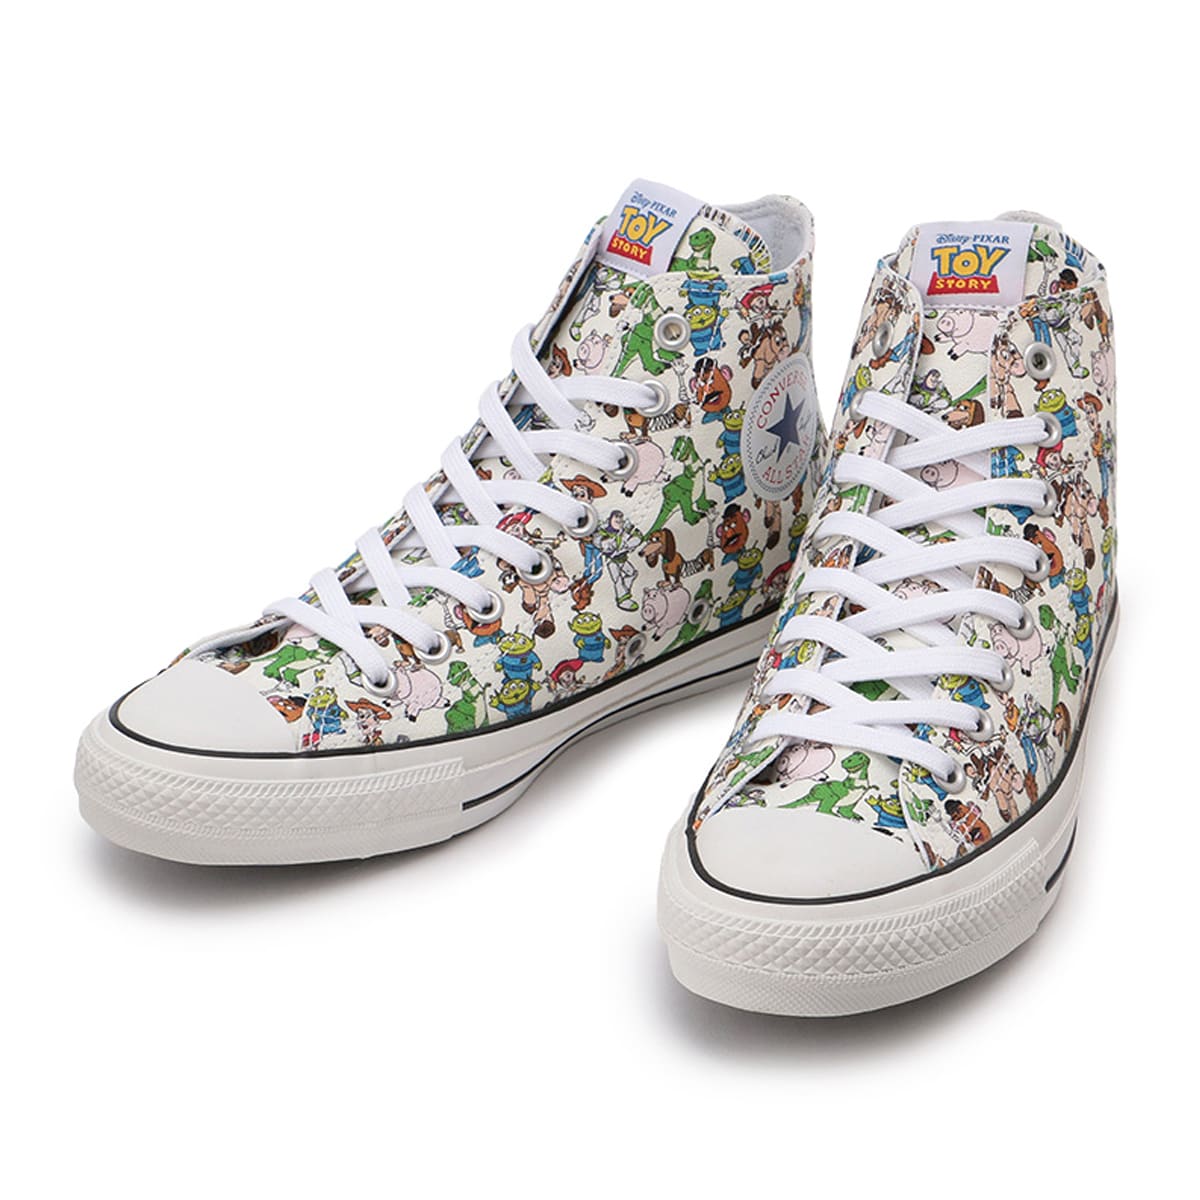 Toy Story x Converse Chuck Taylor All Star 329616600 1